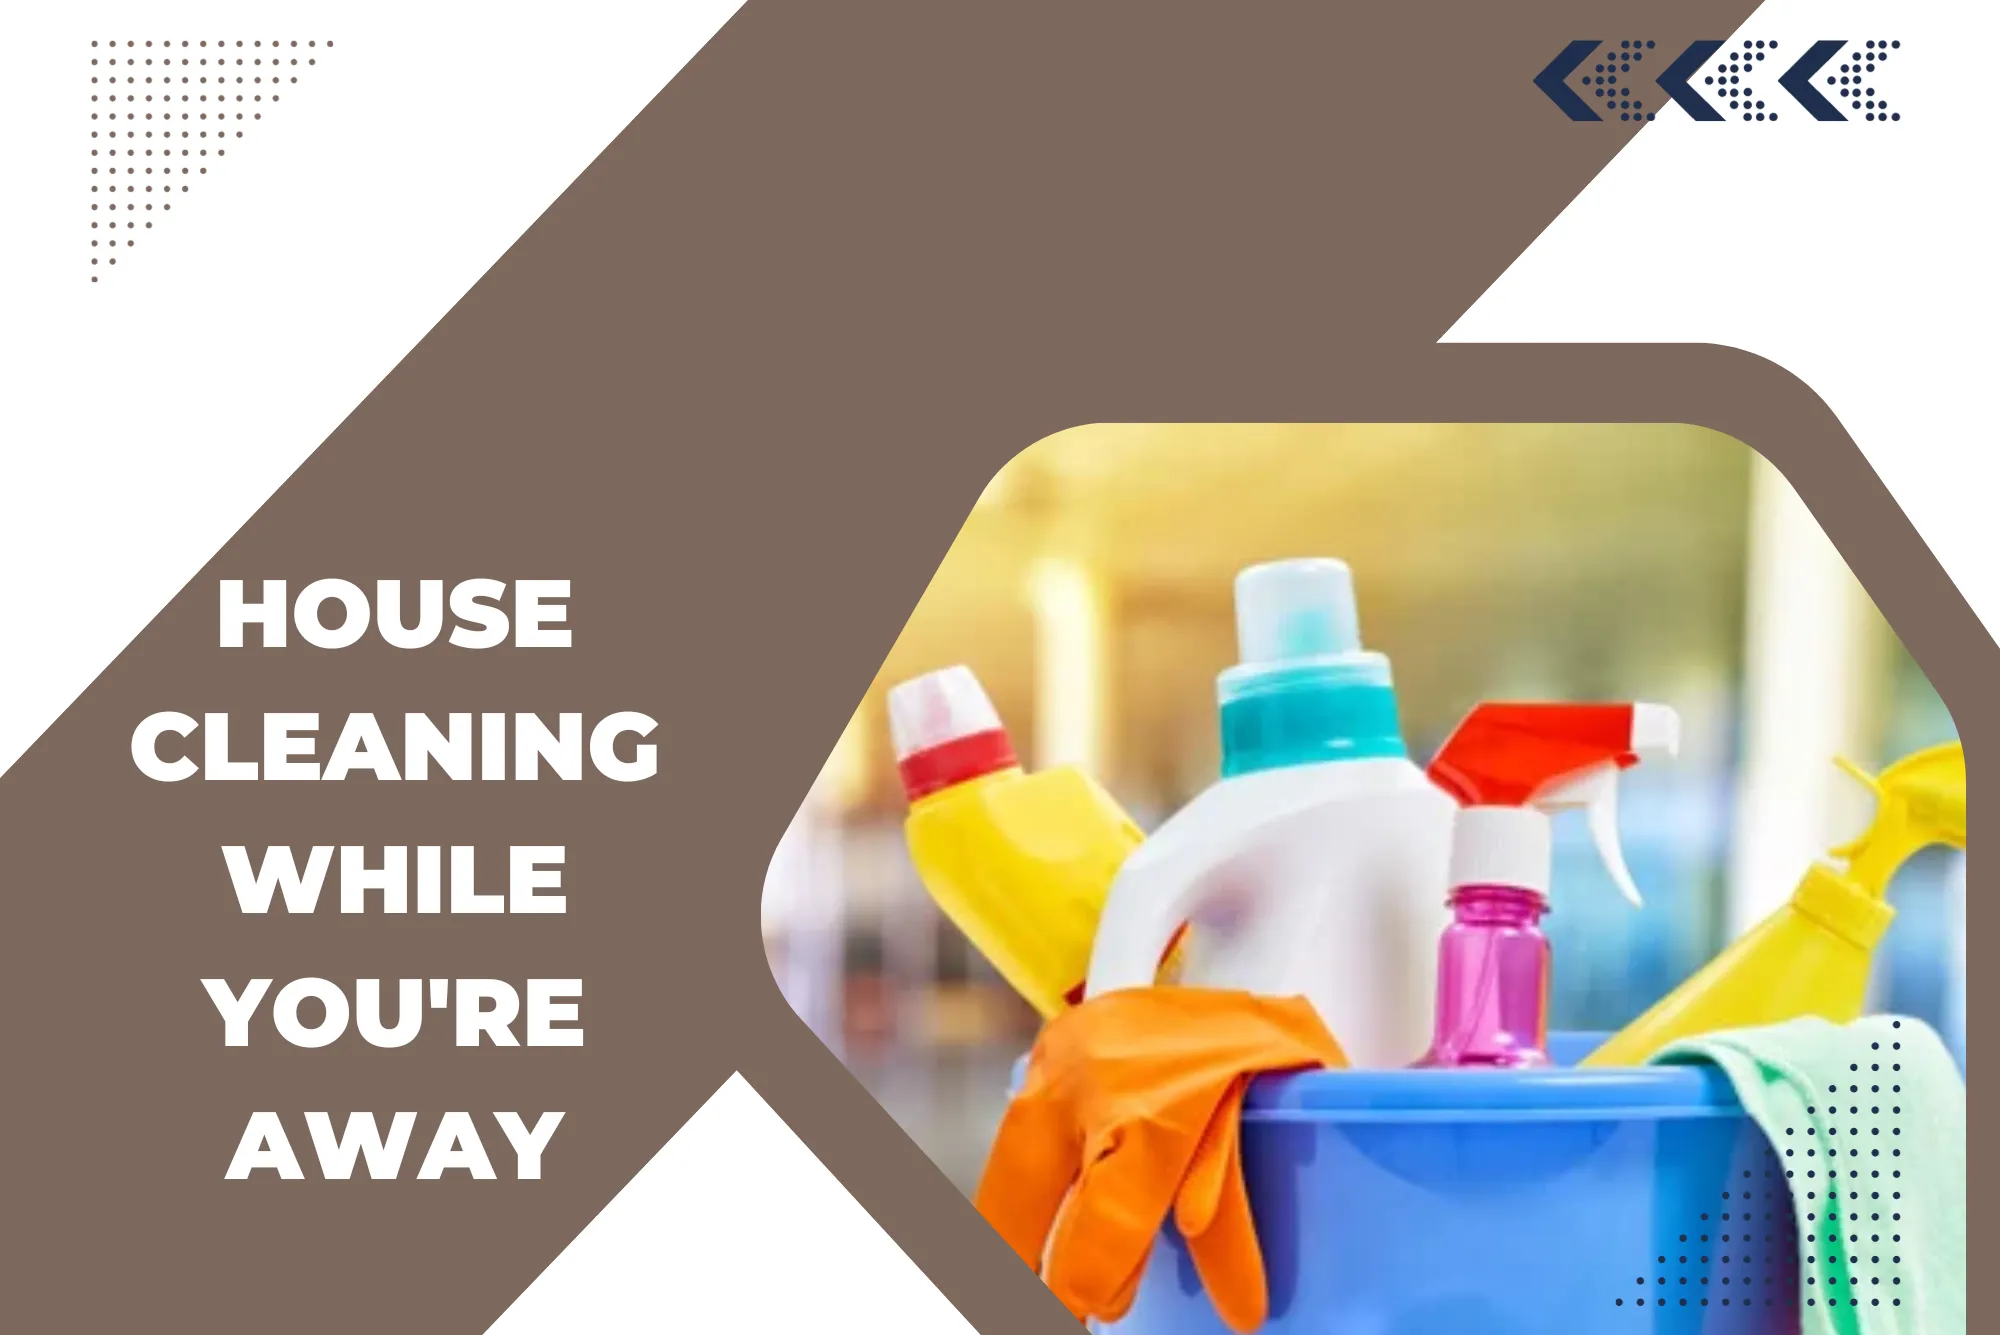 House Cleaning While You're Away